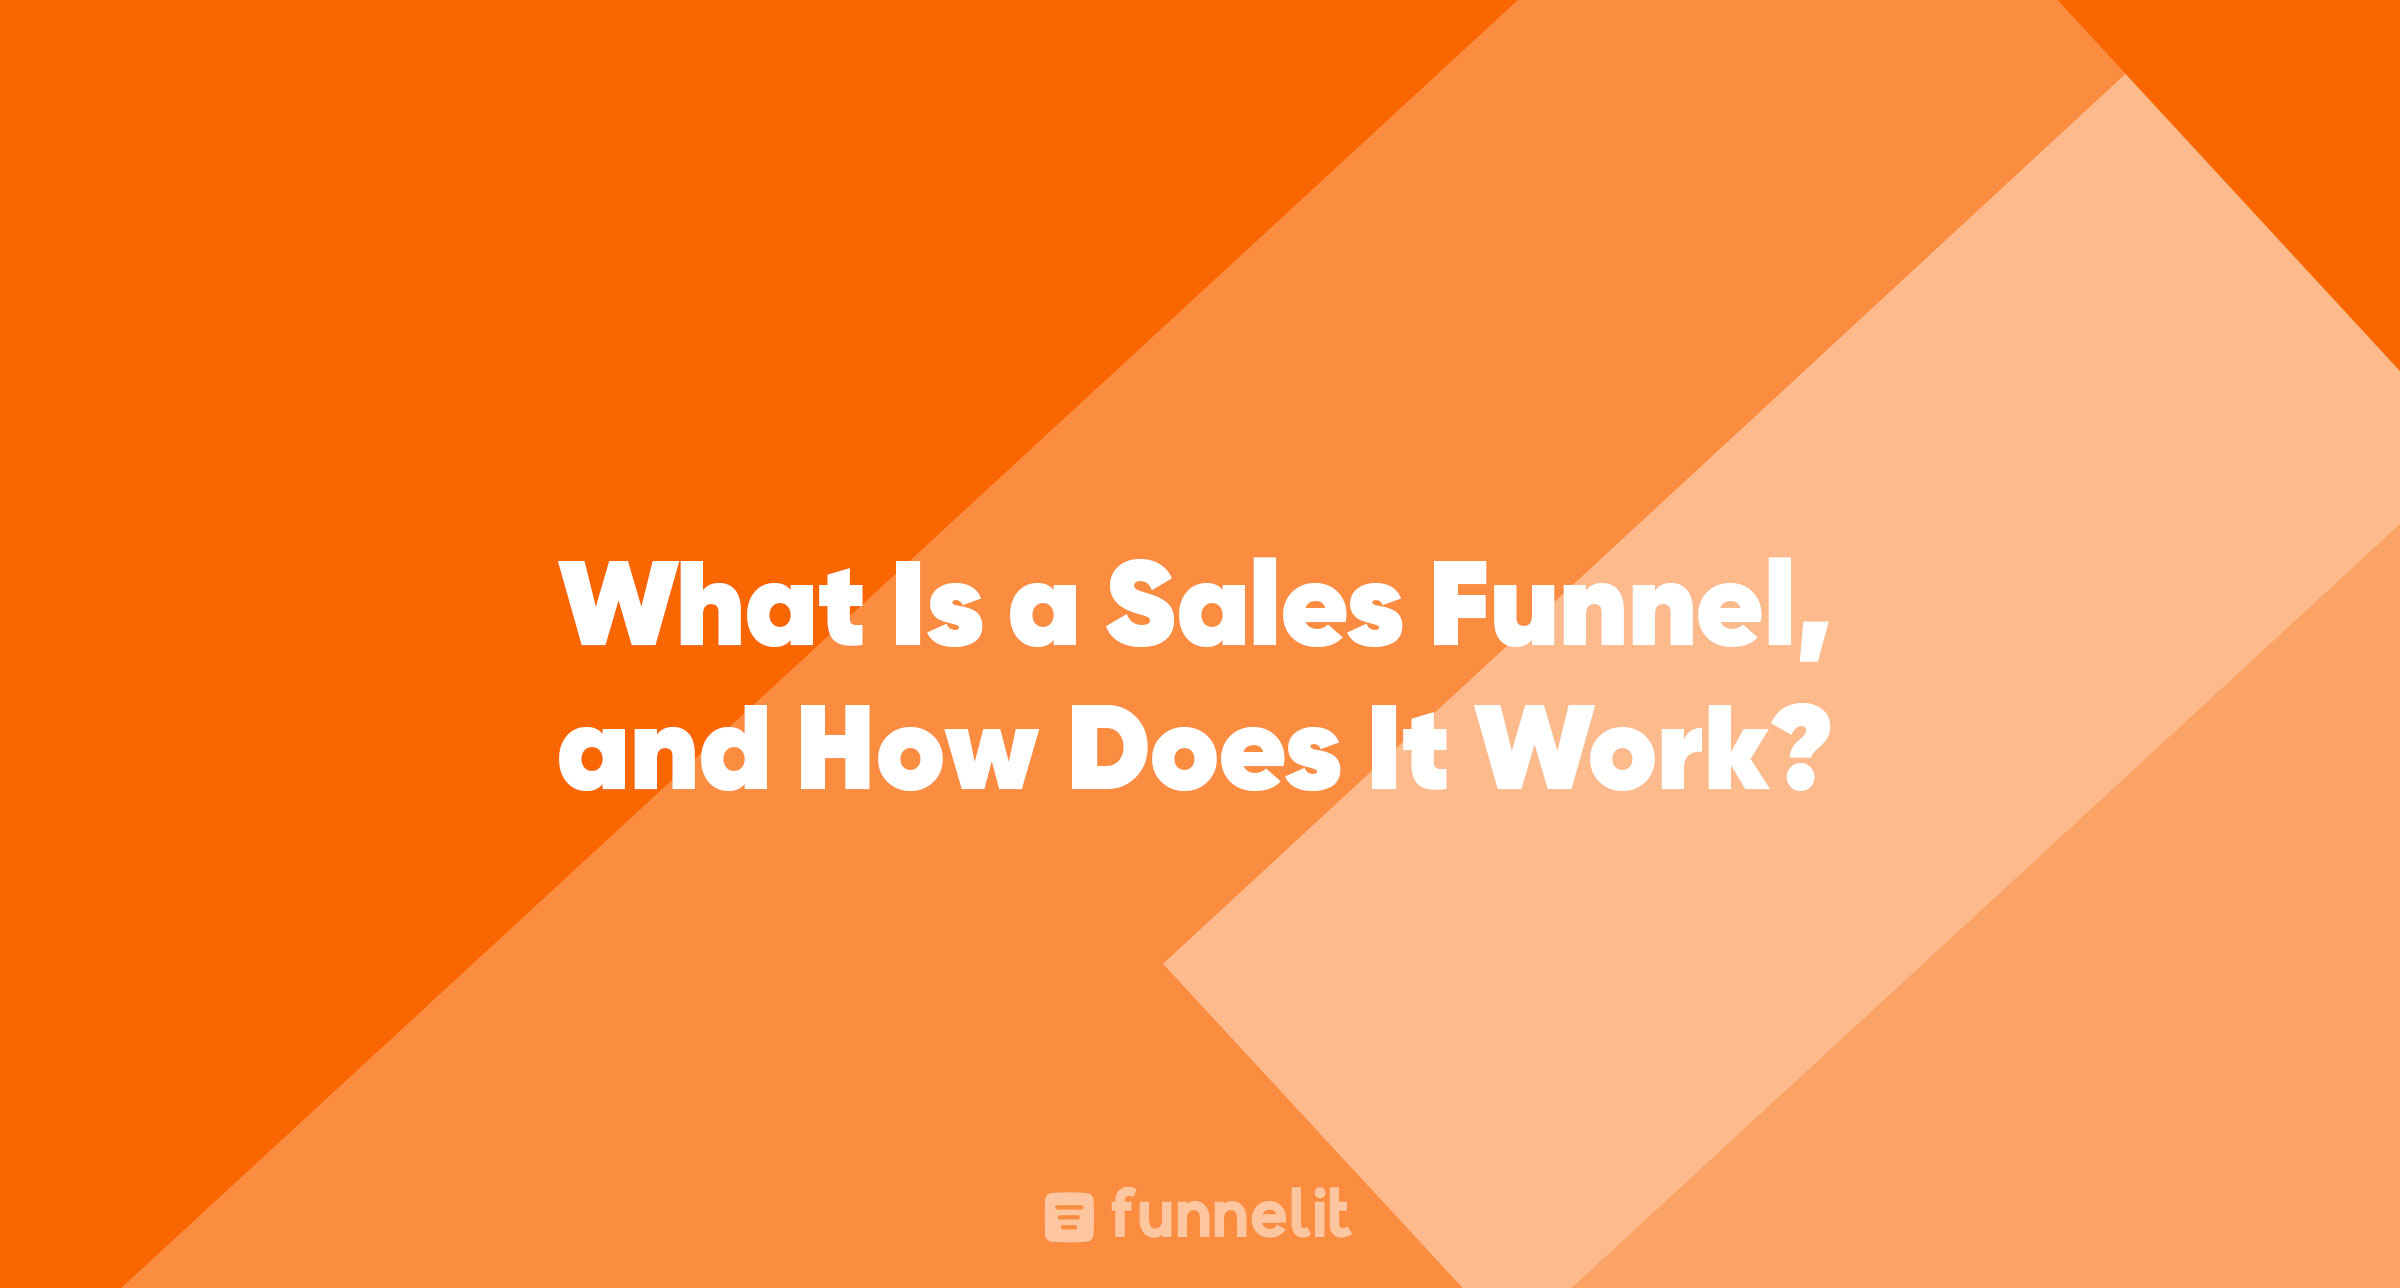 Article | What Is a Sales Funnel, and How Does It Work?